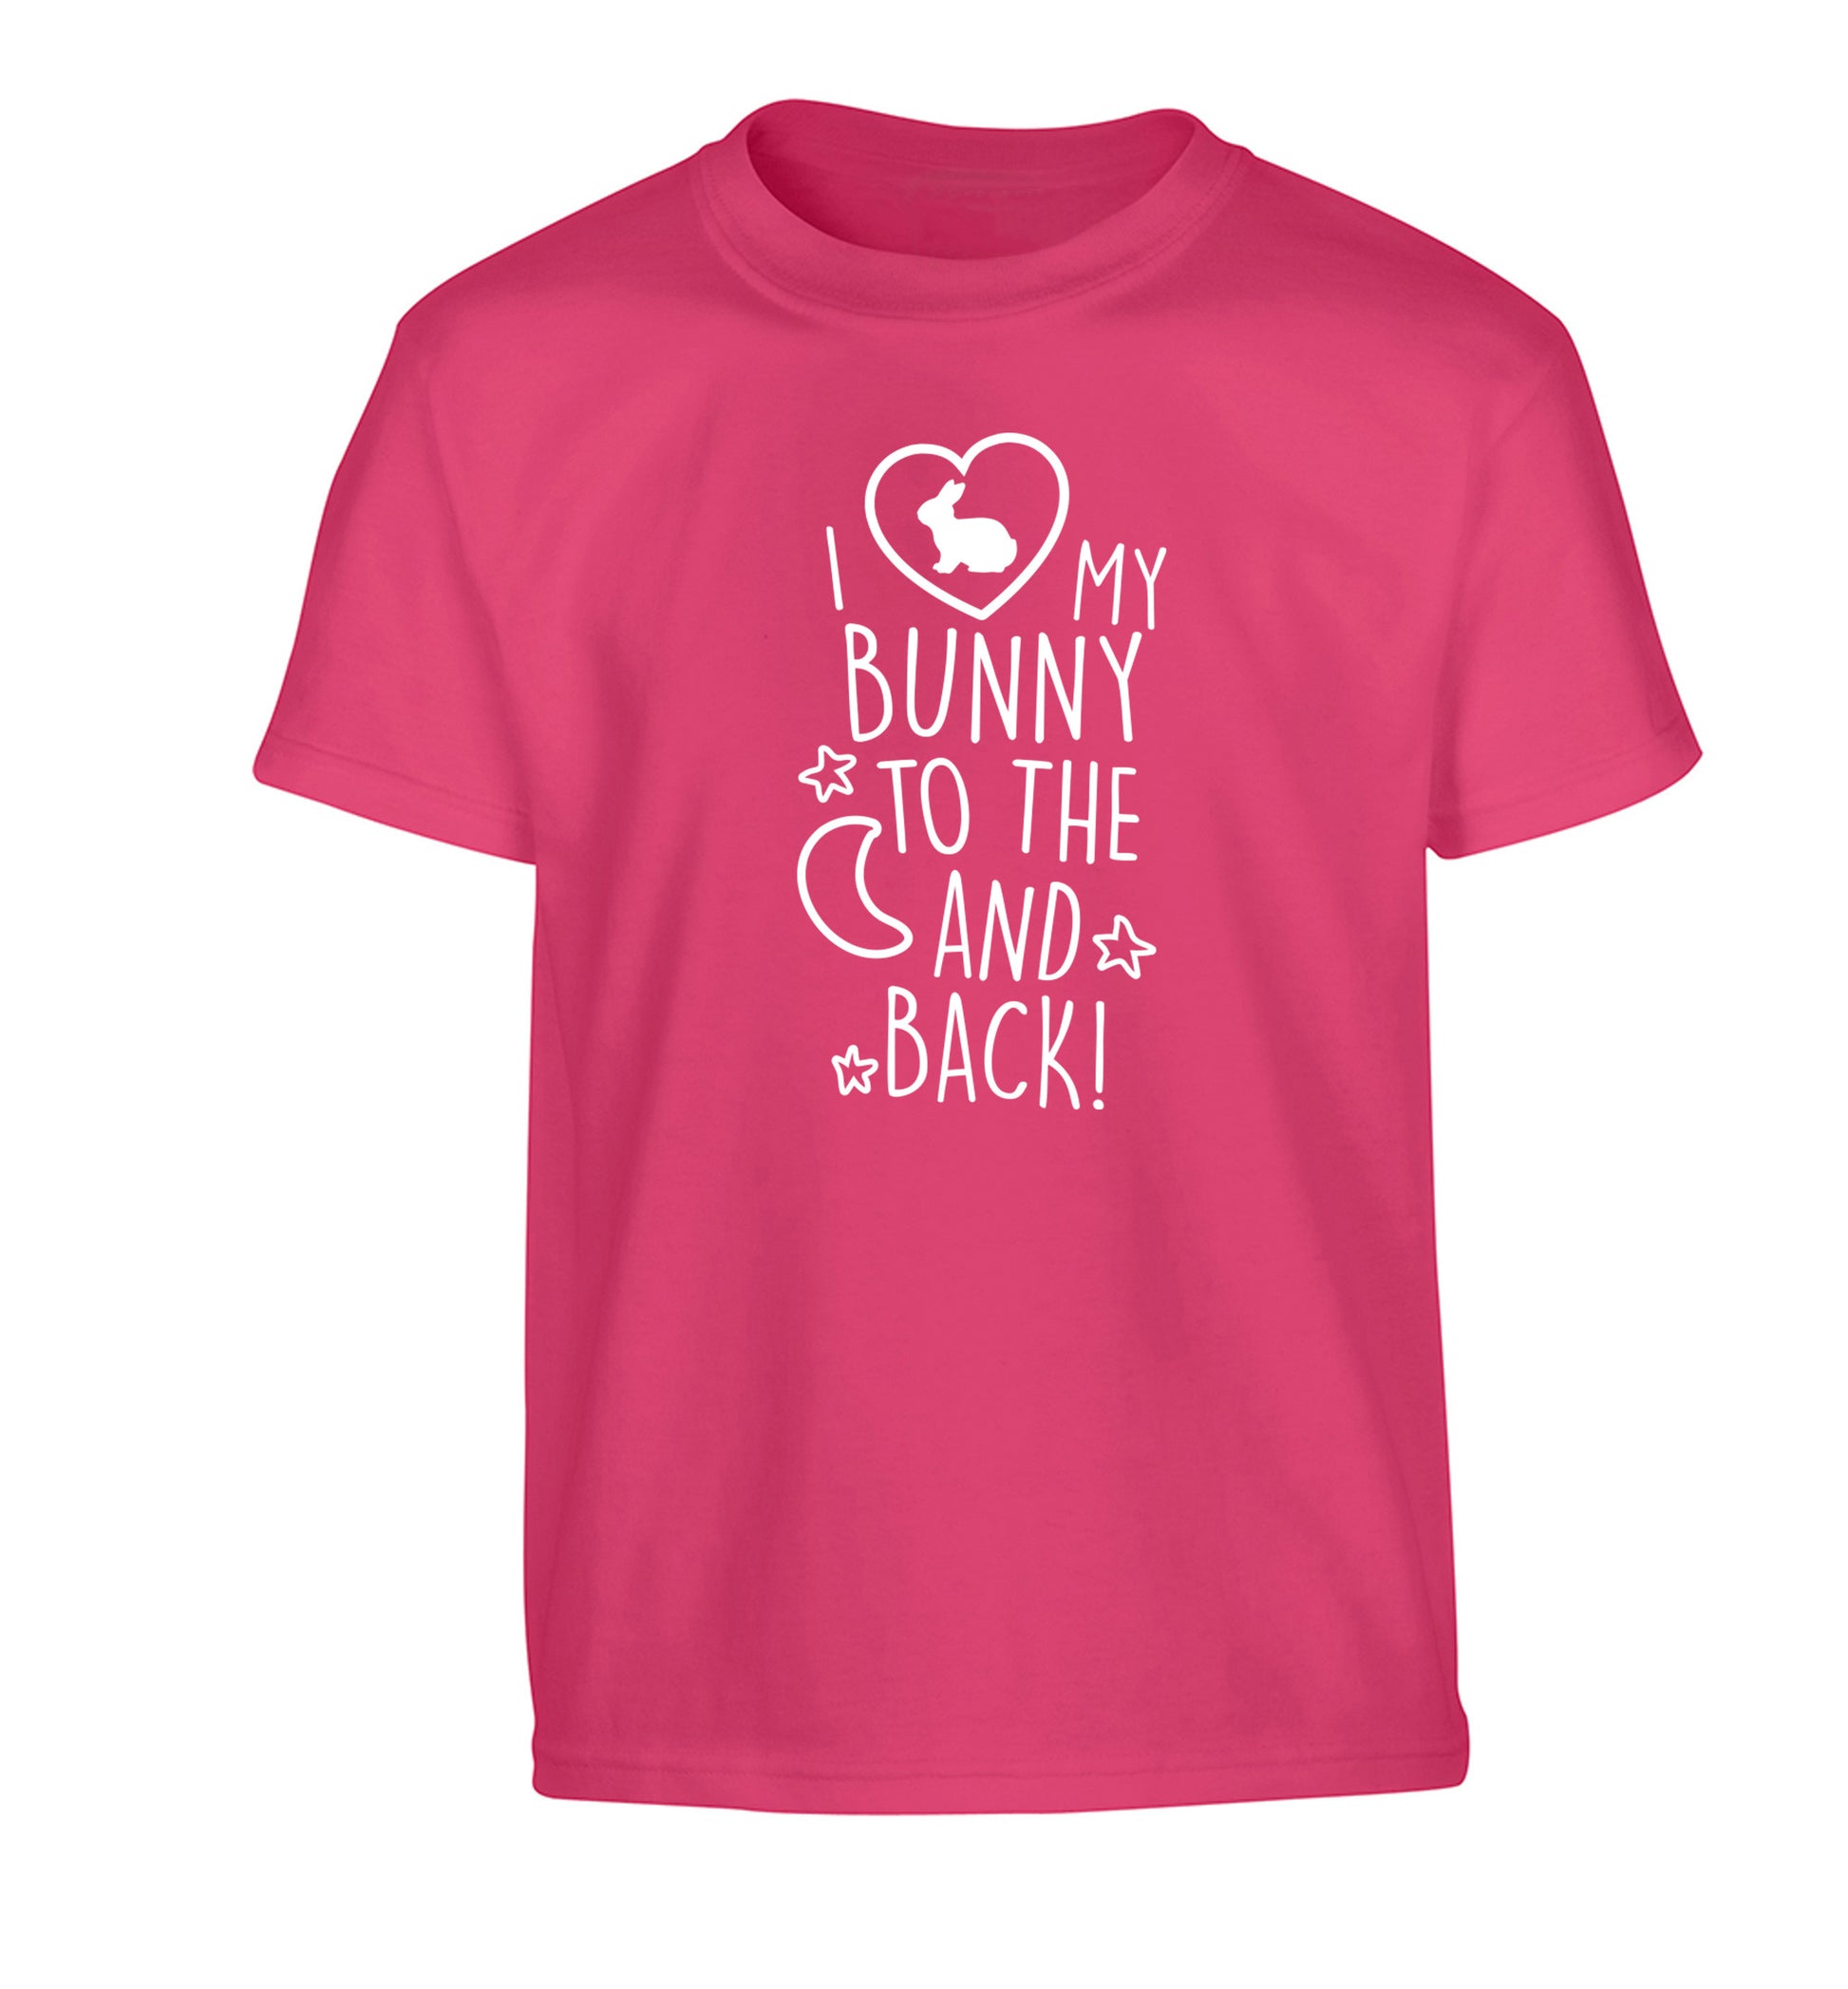 I love my bunny to the moon and back Children's pink Tshirt 12-14 Years